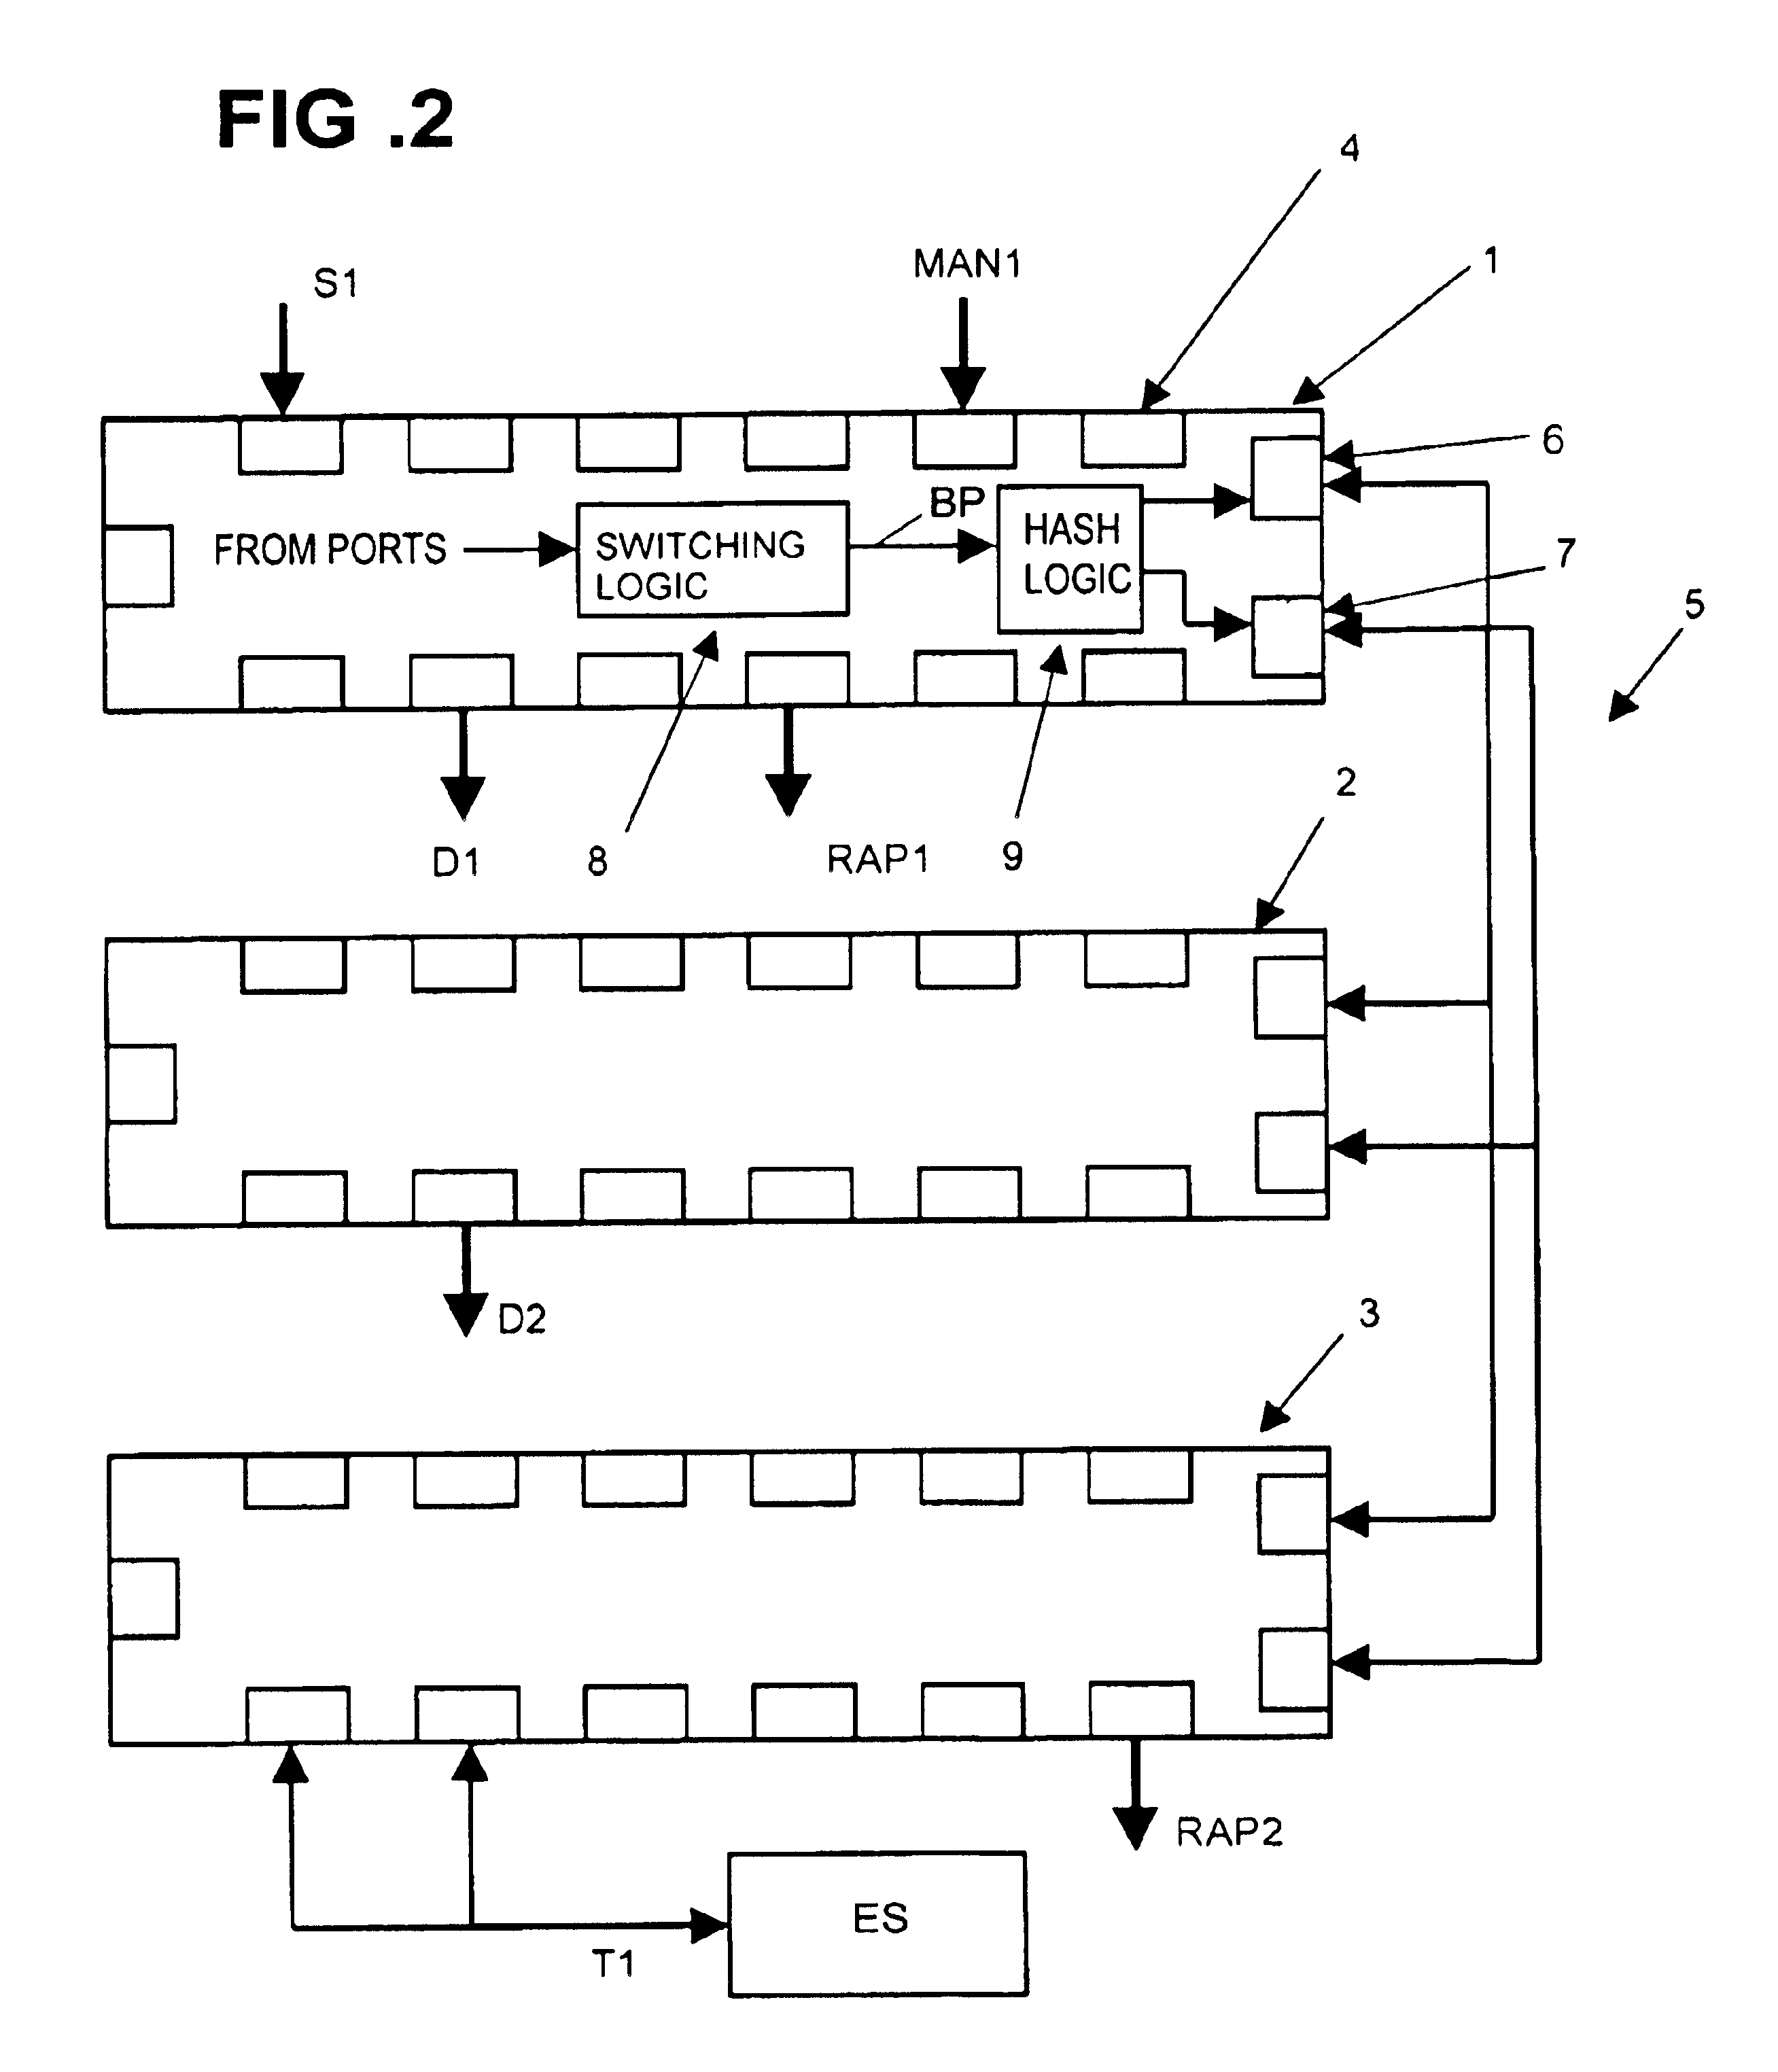 Port mirroring across a trunked stack of multi-port communication devices